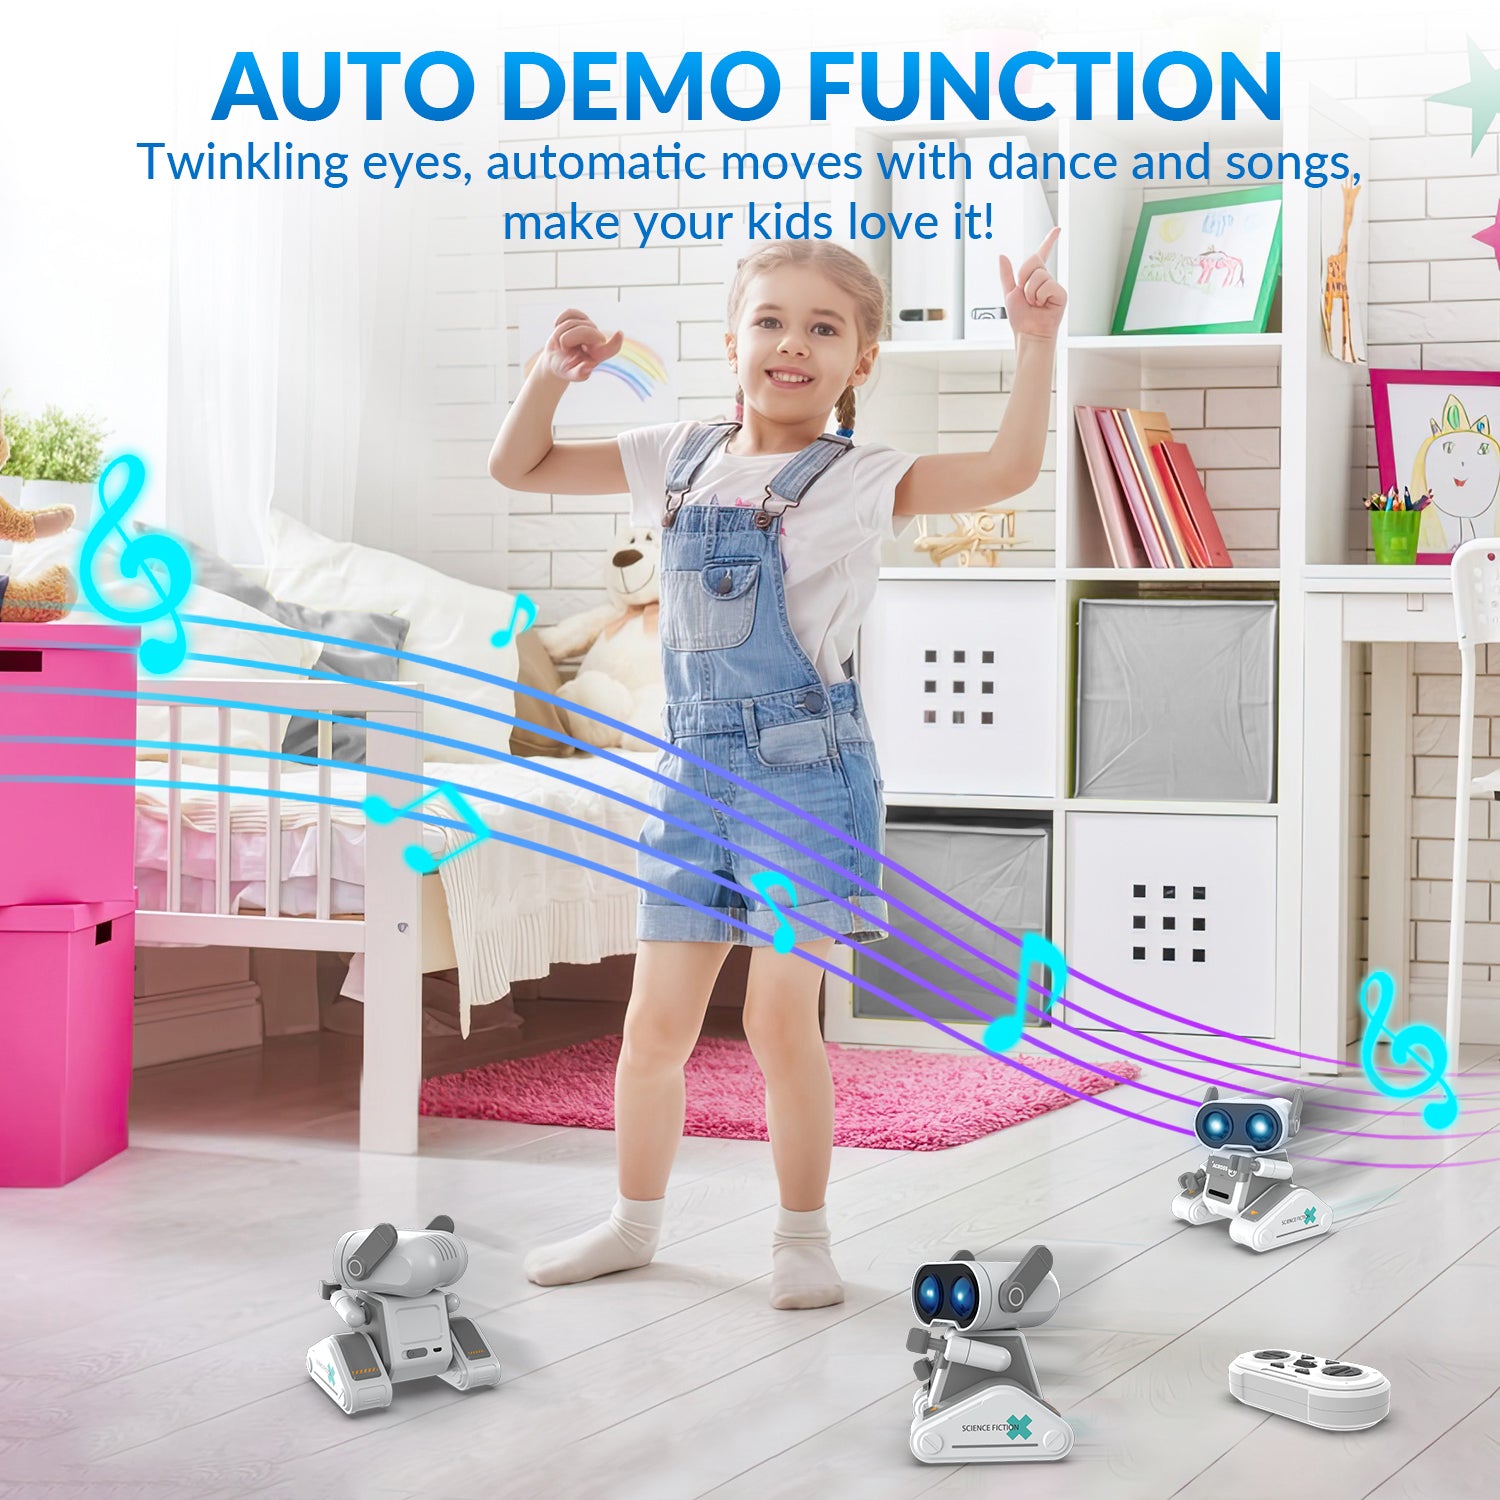 STEMTRON Rechargeable RC Robot Toys with Auto Demo, Dance Moves, Music for Kids (Grey)